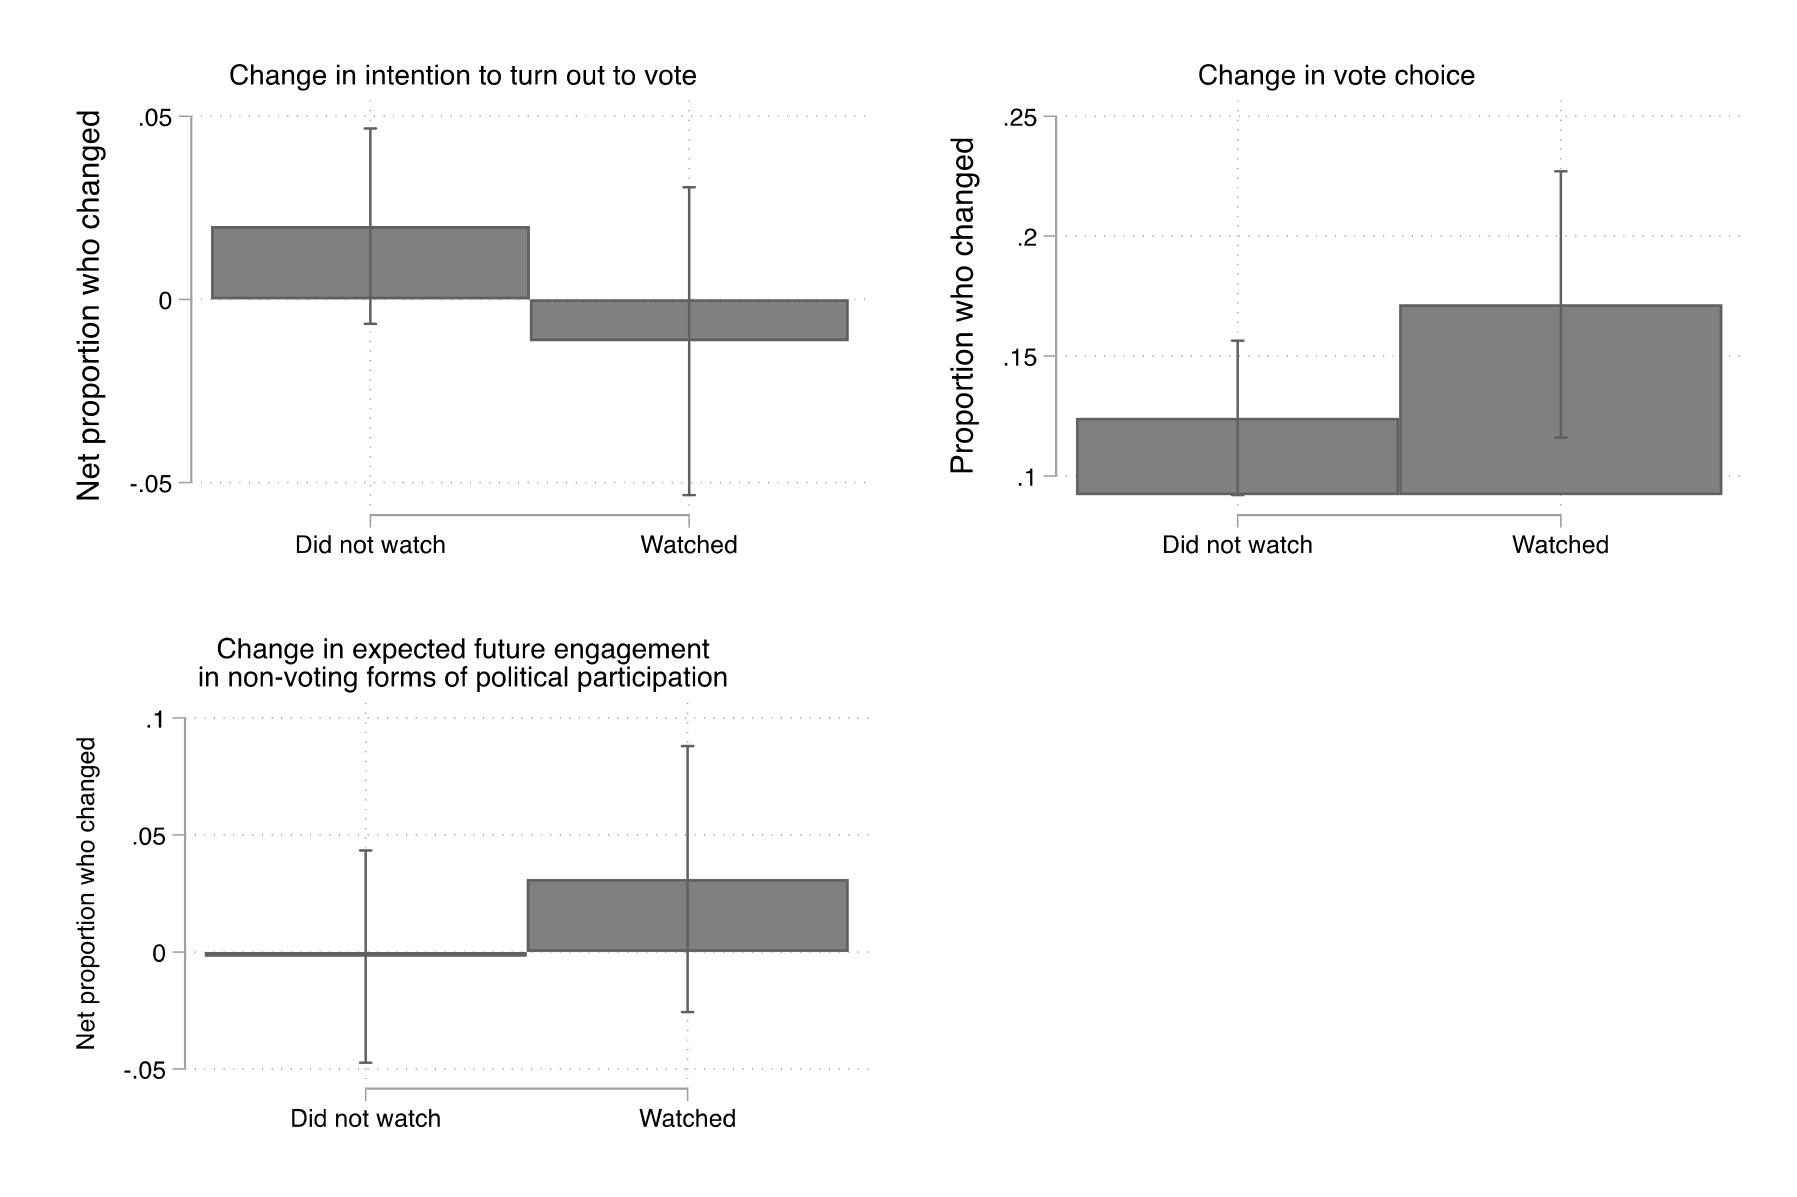 Figure 28. This figure shows the impact of debate viewership on three political behaviour outcomes:  intention to turn out to vote, vote choice, and expectations for non-voting forms of political participation in the future.  Debate watching was not associated with changes in any of these three outcomes.